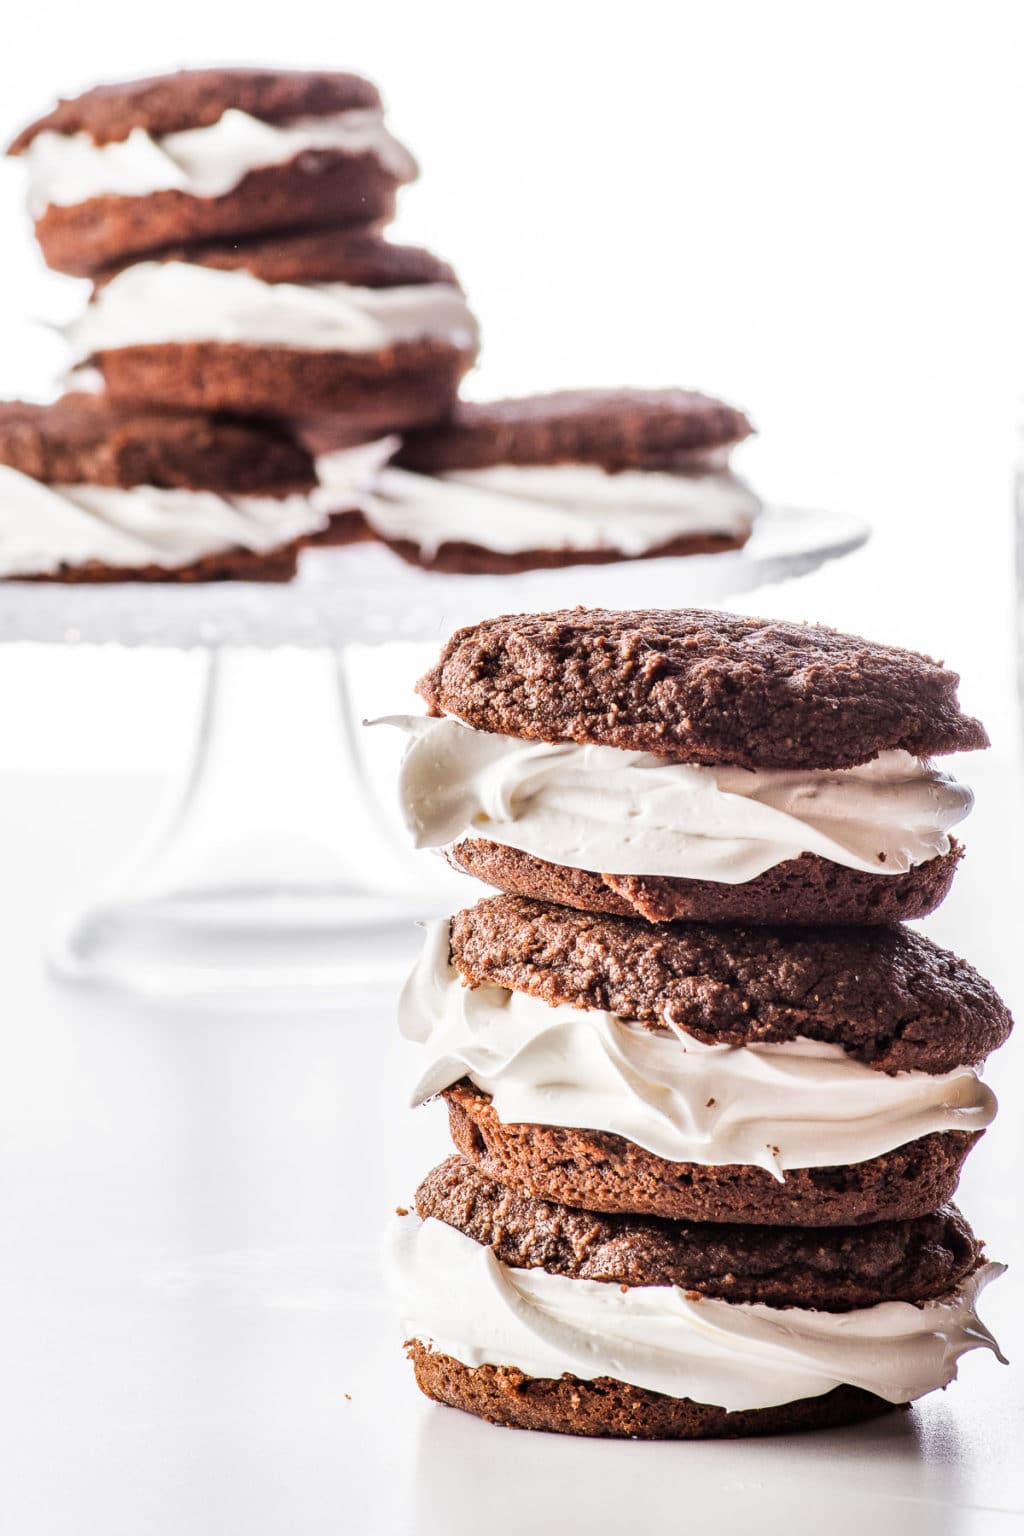 Stacked chocolate low carb whoopie pies on a bright white background